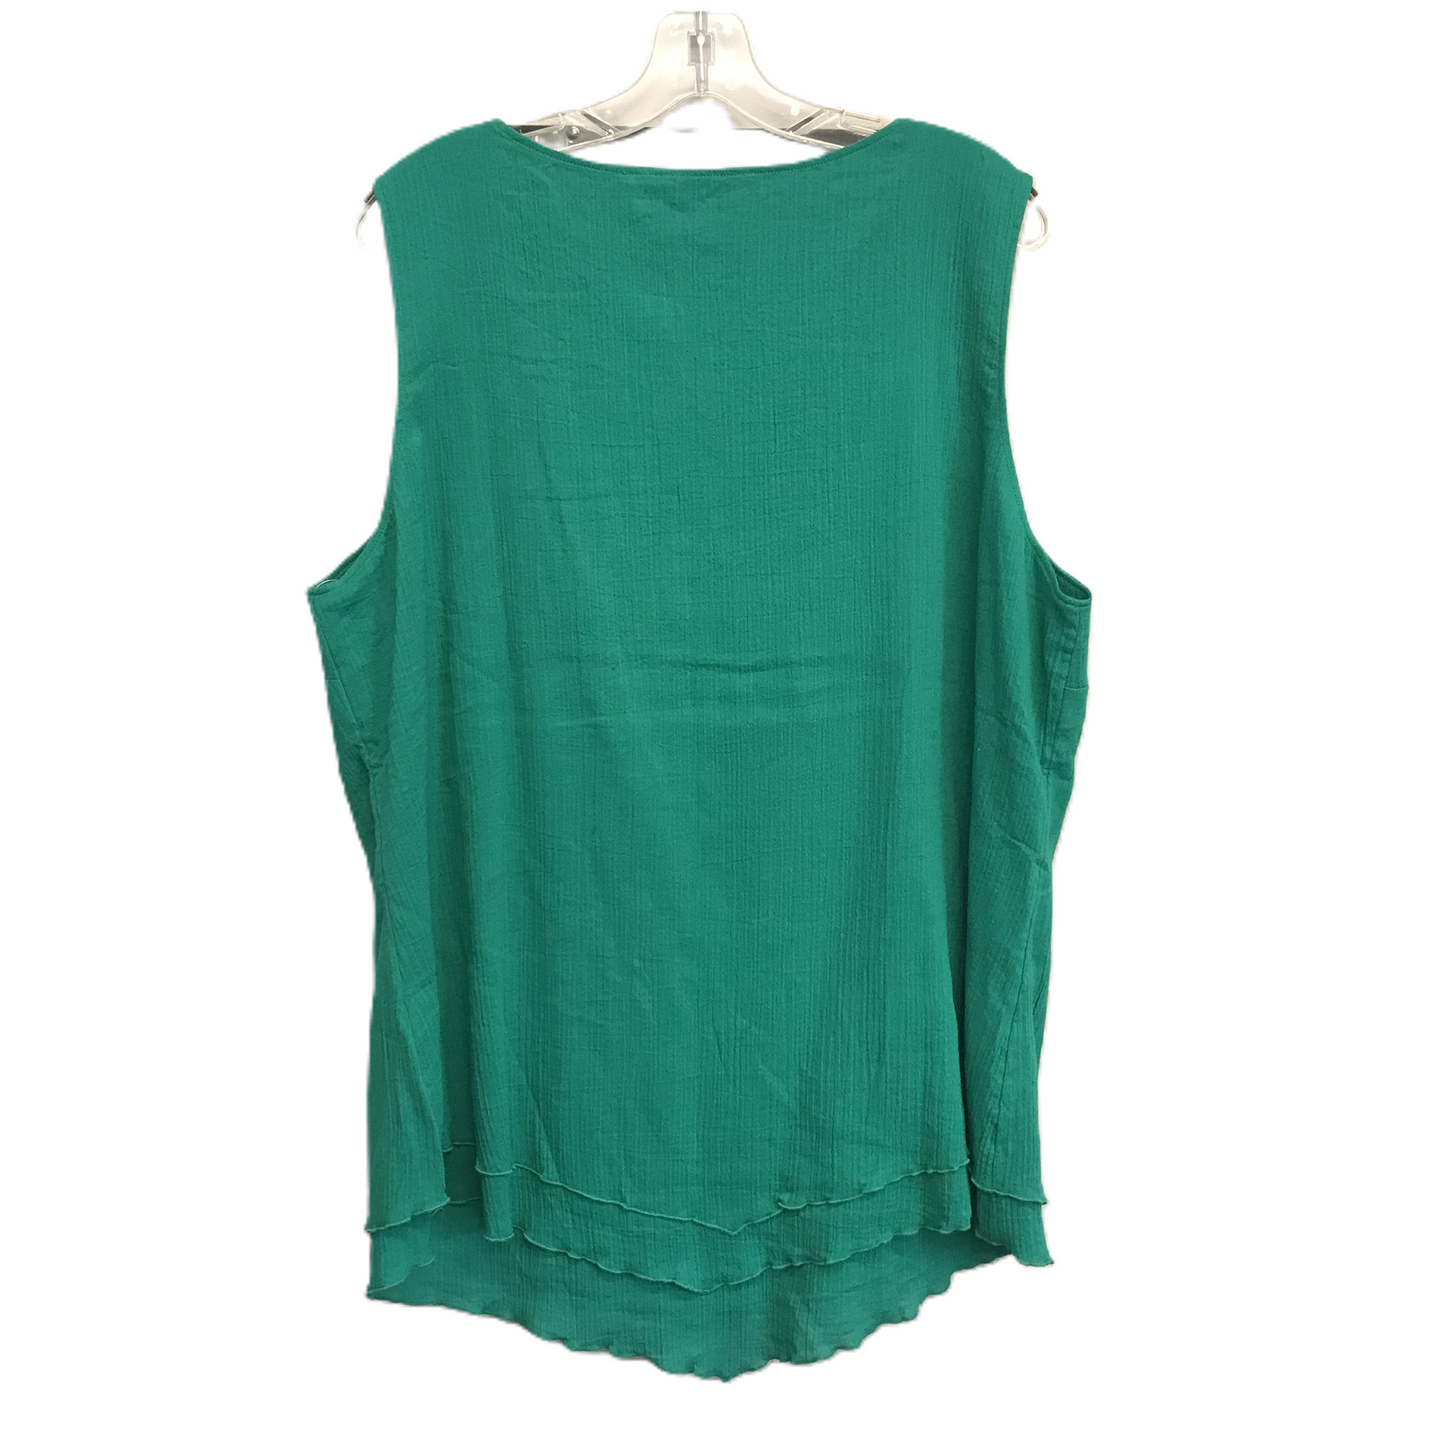 Green Top Sleeveless By Soft Surroundings, Size: 1x